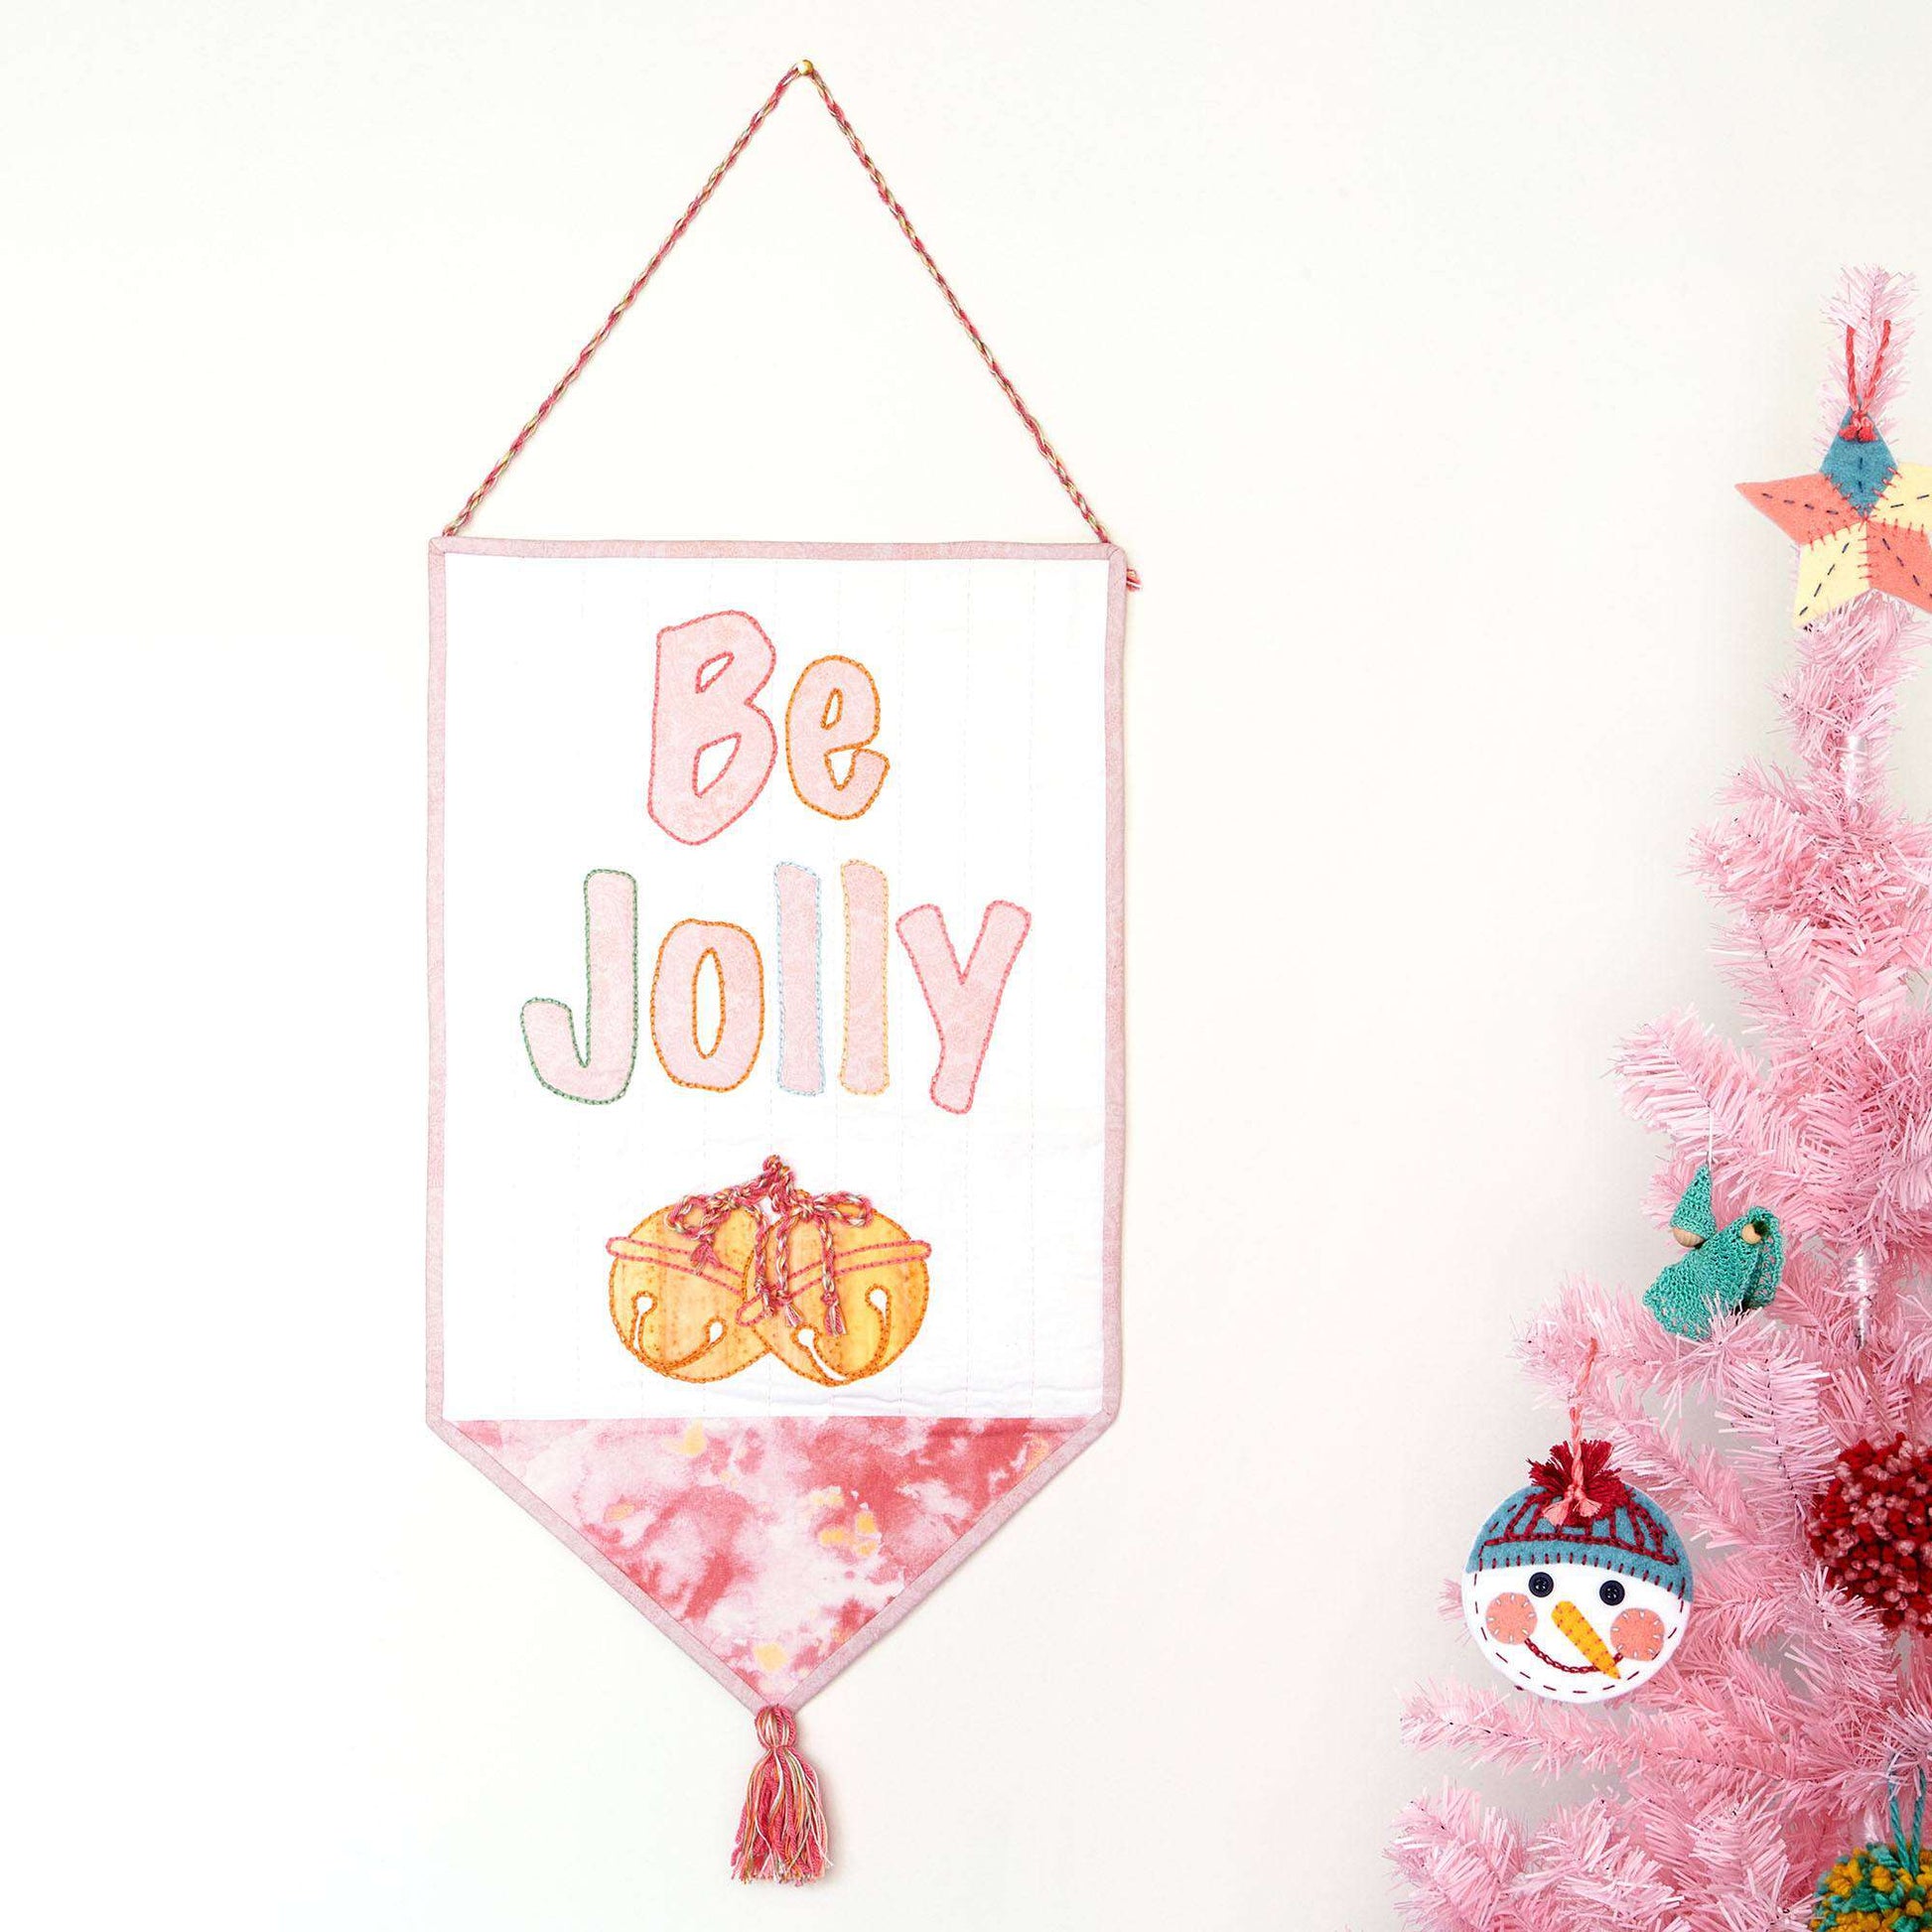 Free Coats & Clark Sewing Be Jolly Wall Hanging Pattern